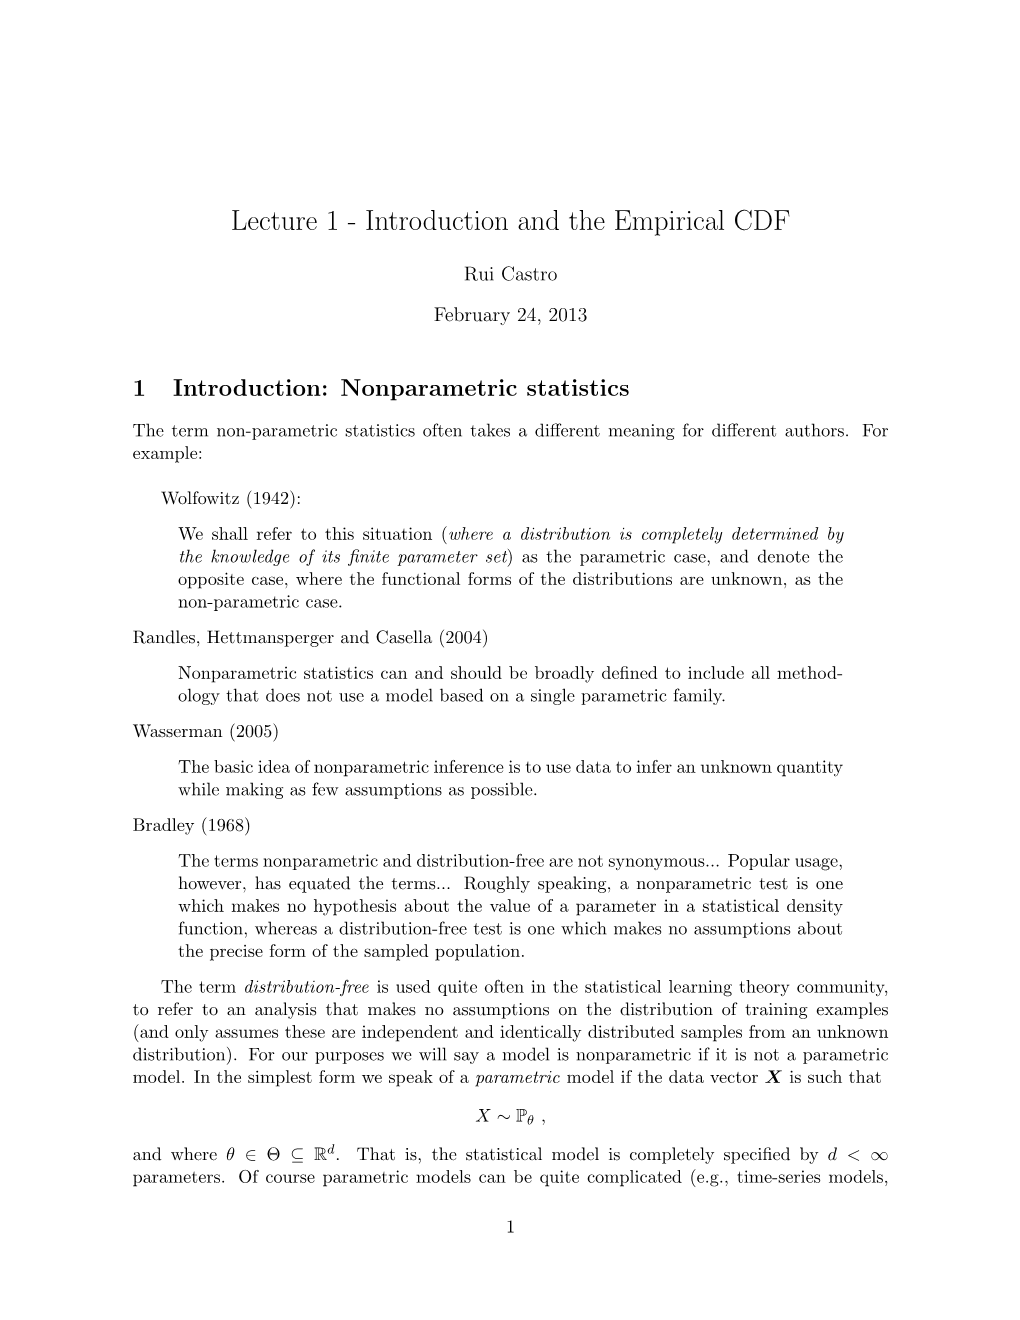 Lecture 1 - Introduction and the Empirical CDF